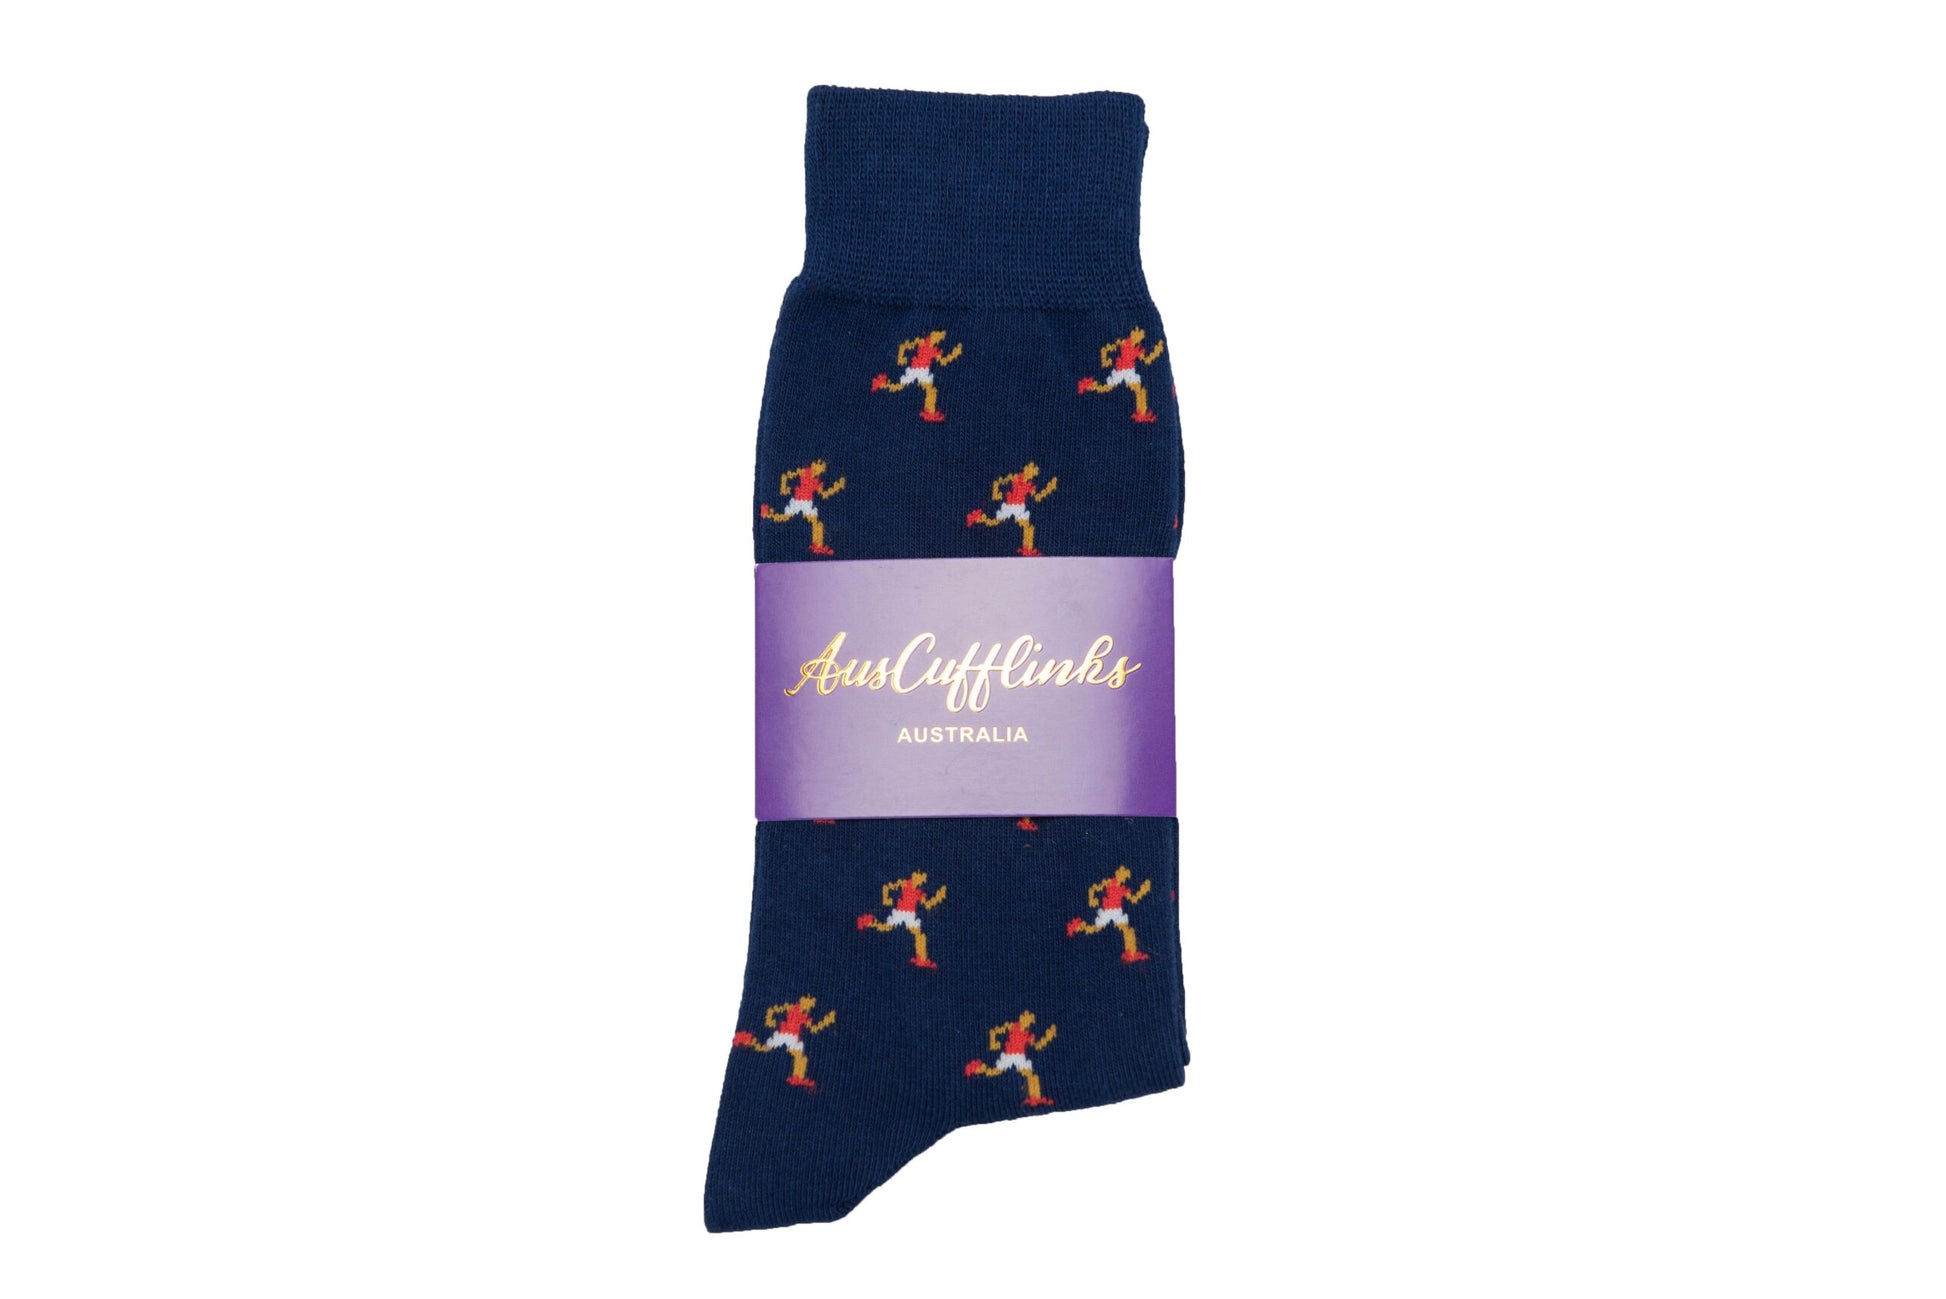 Athletics Socks: A blue sock with running people on it.